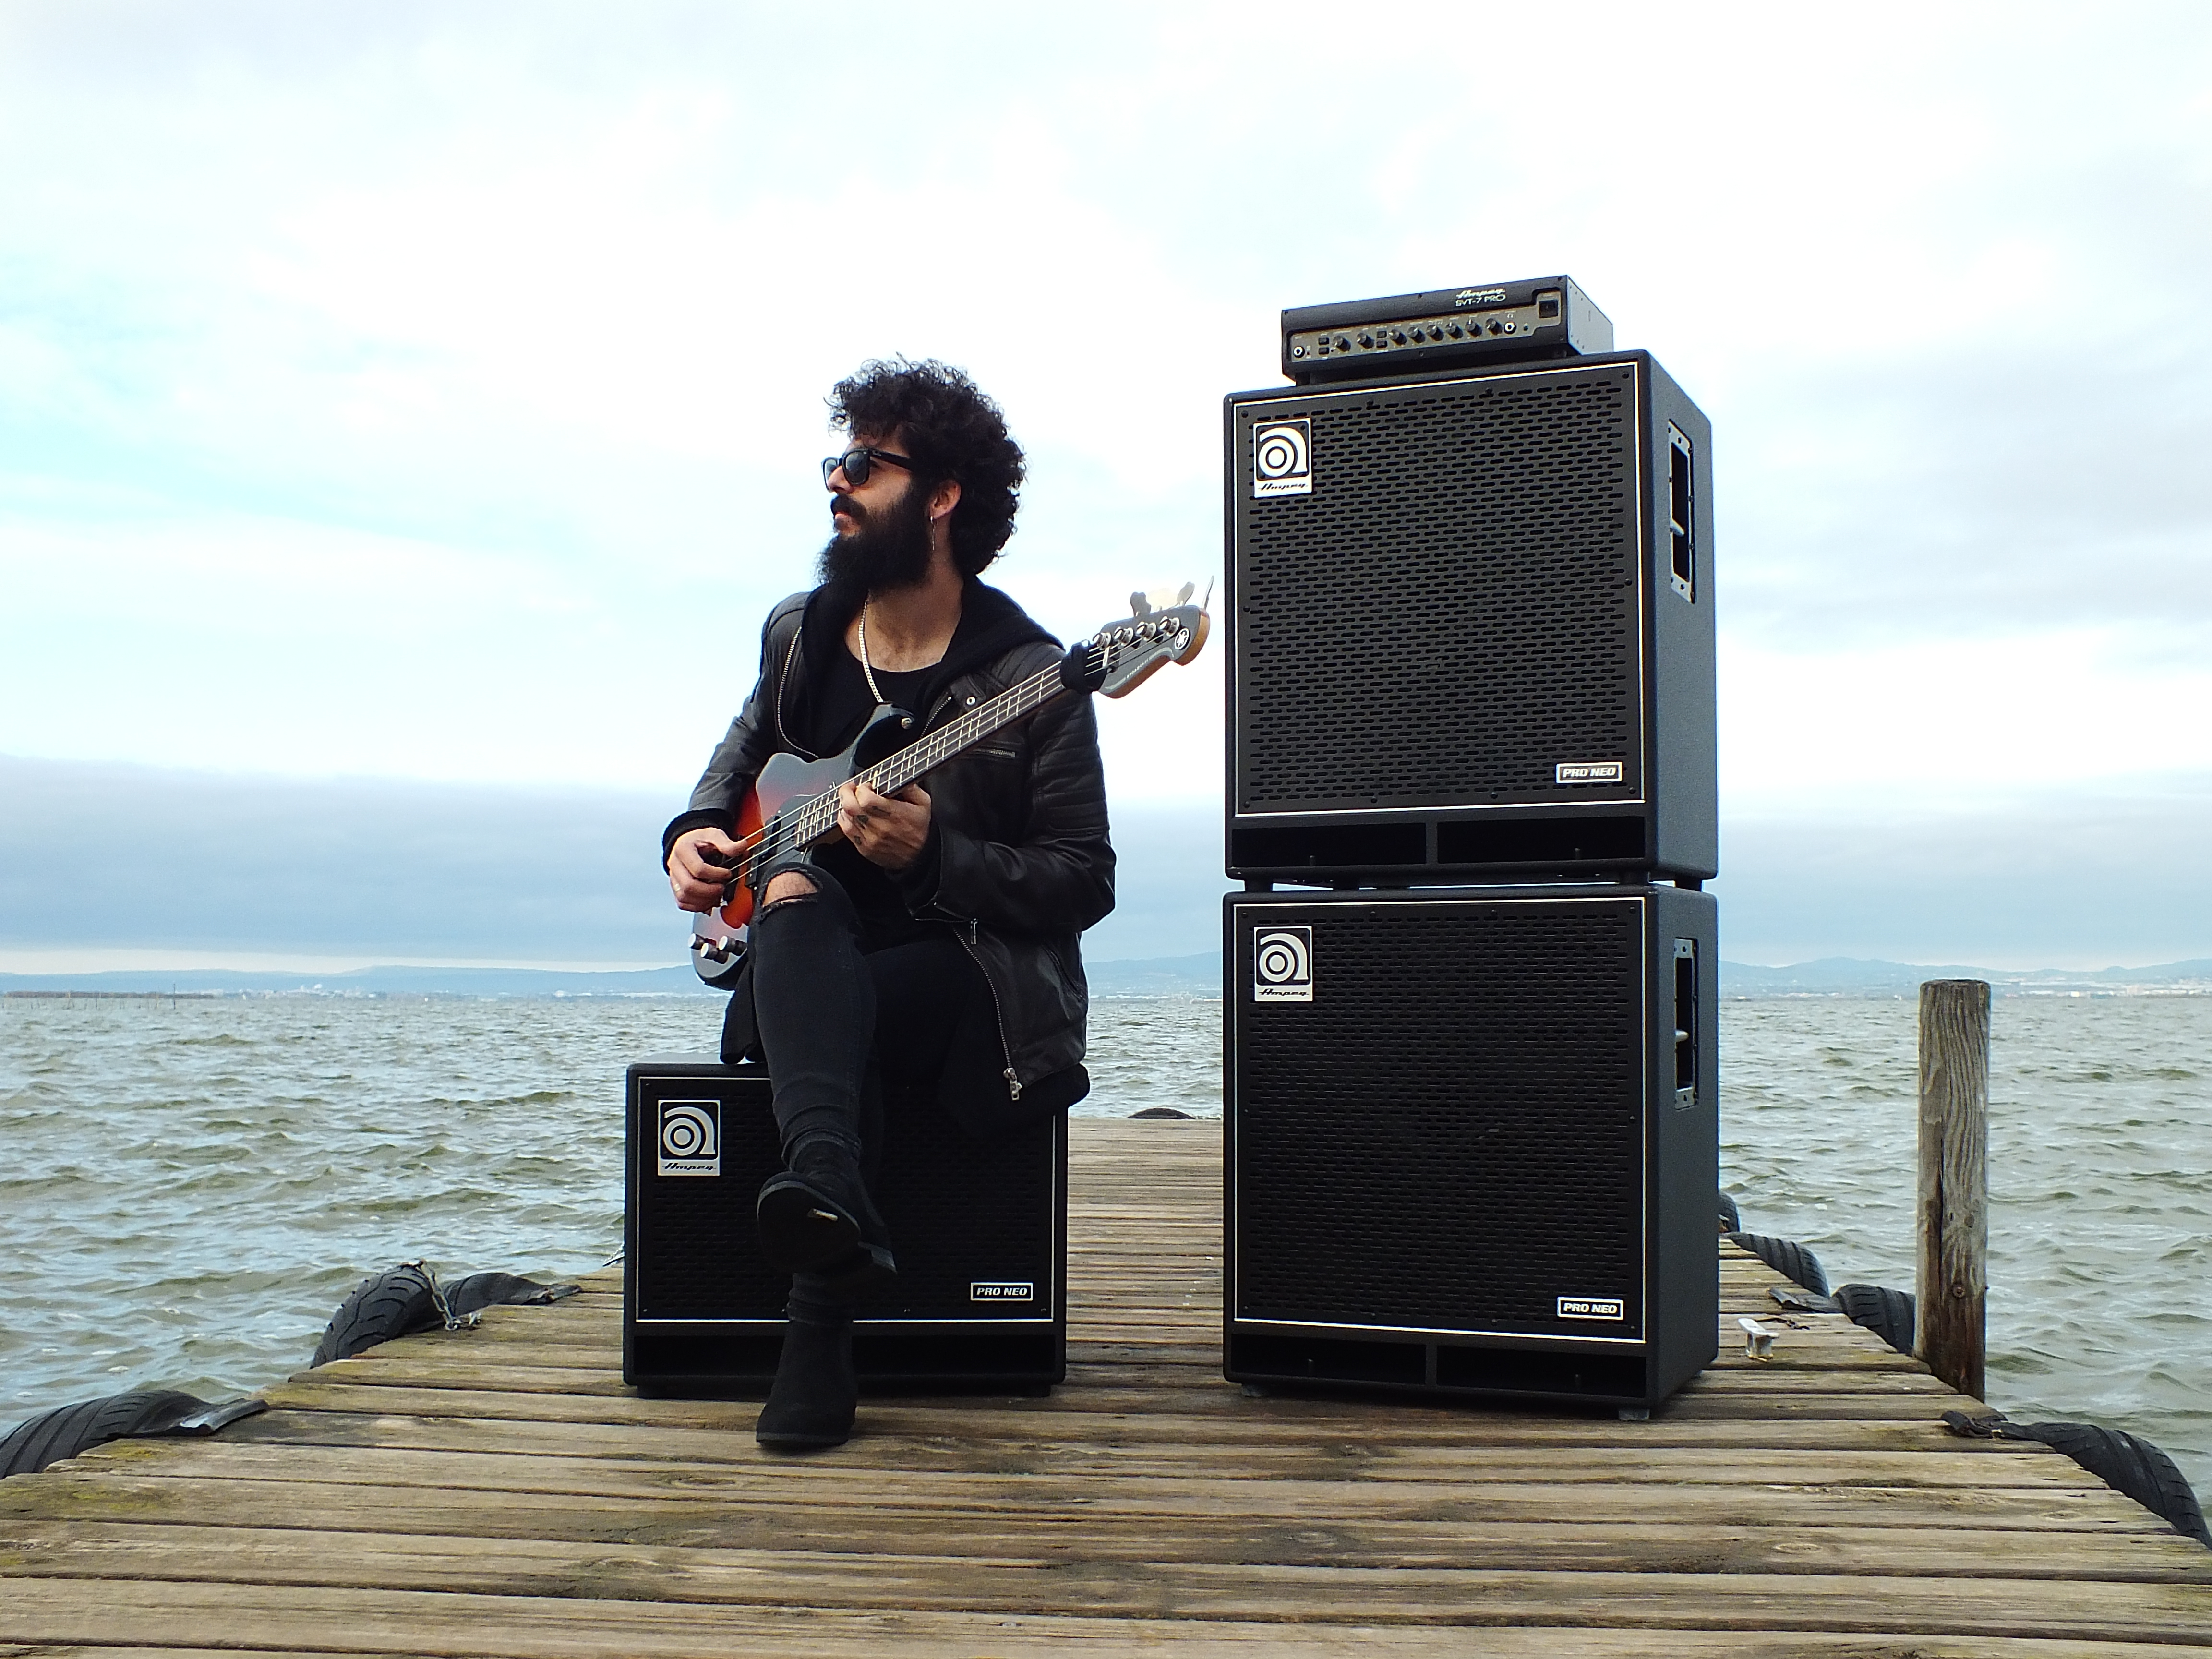 Vincen Garcia playing bass sitting on an Ampeg cab outside on a dock